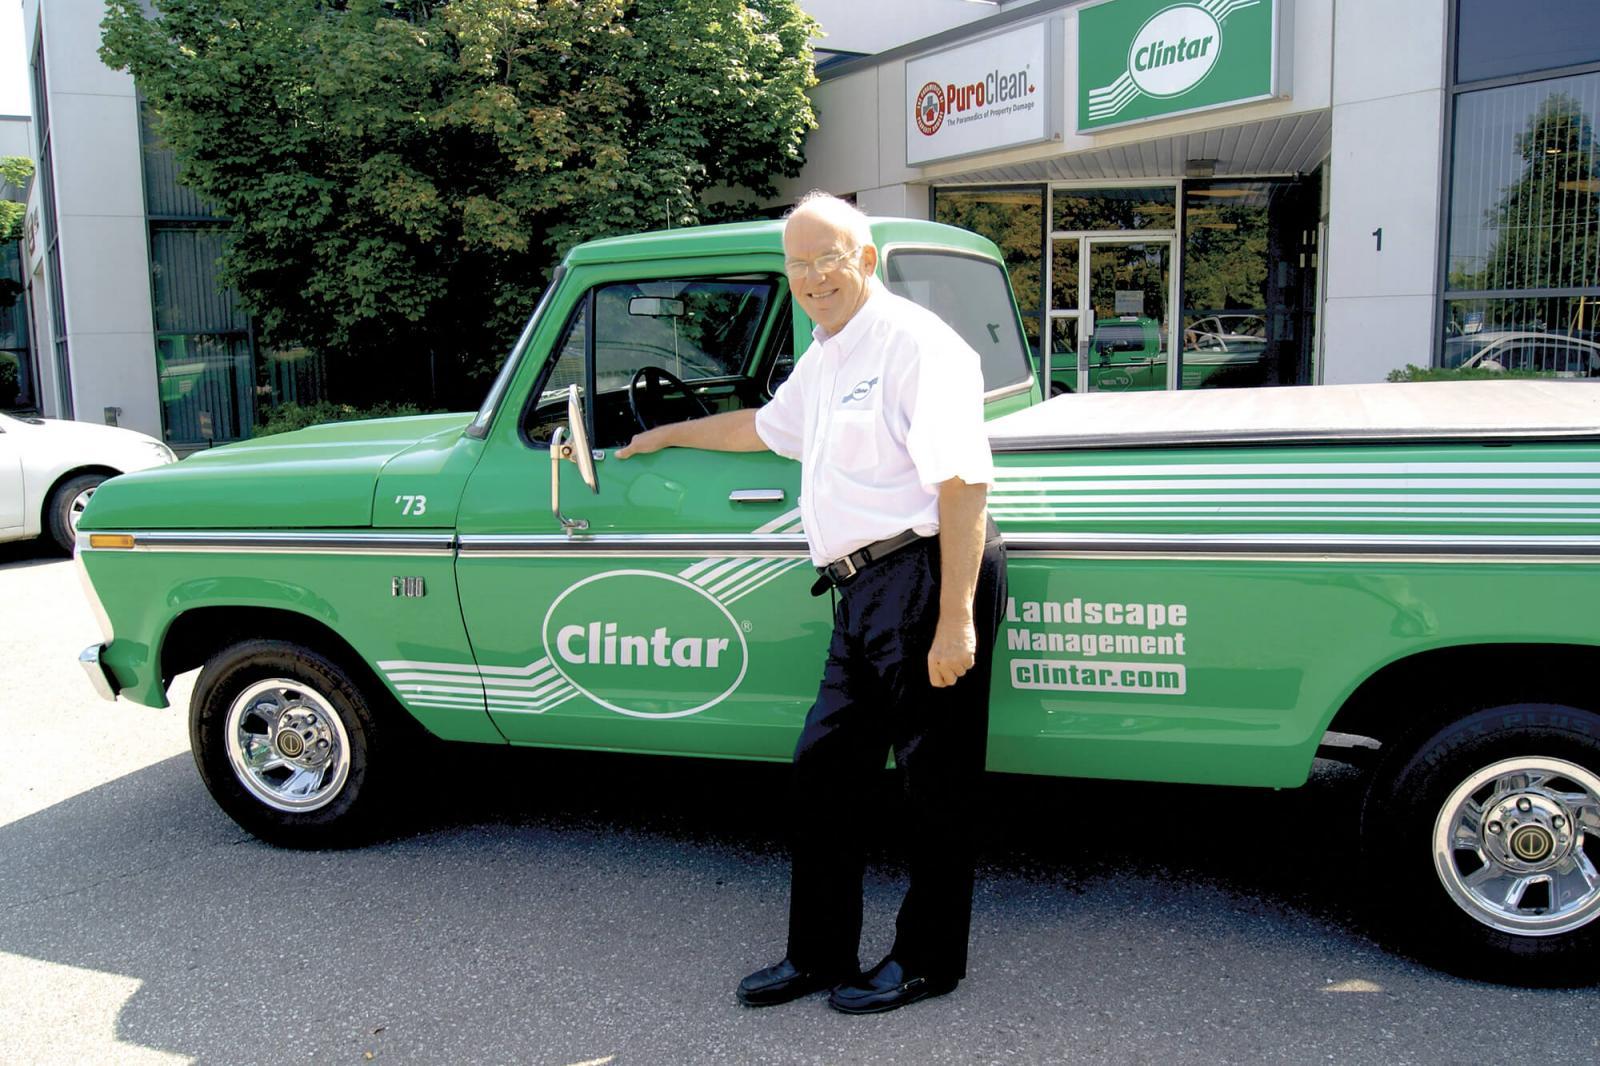 In its 40th year, Clintar Landscape Management continues to grow